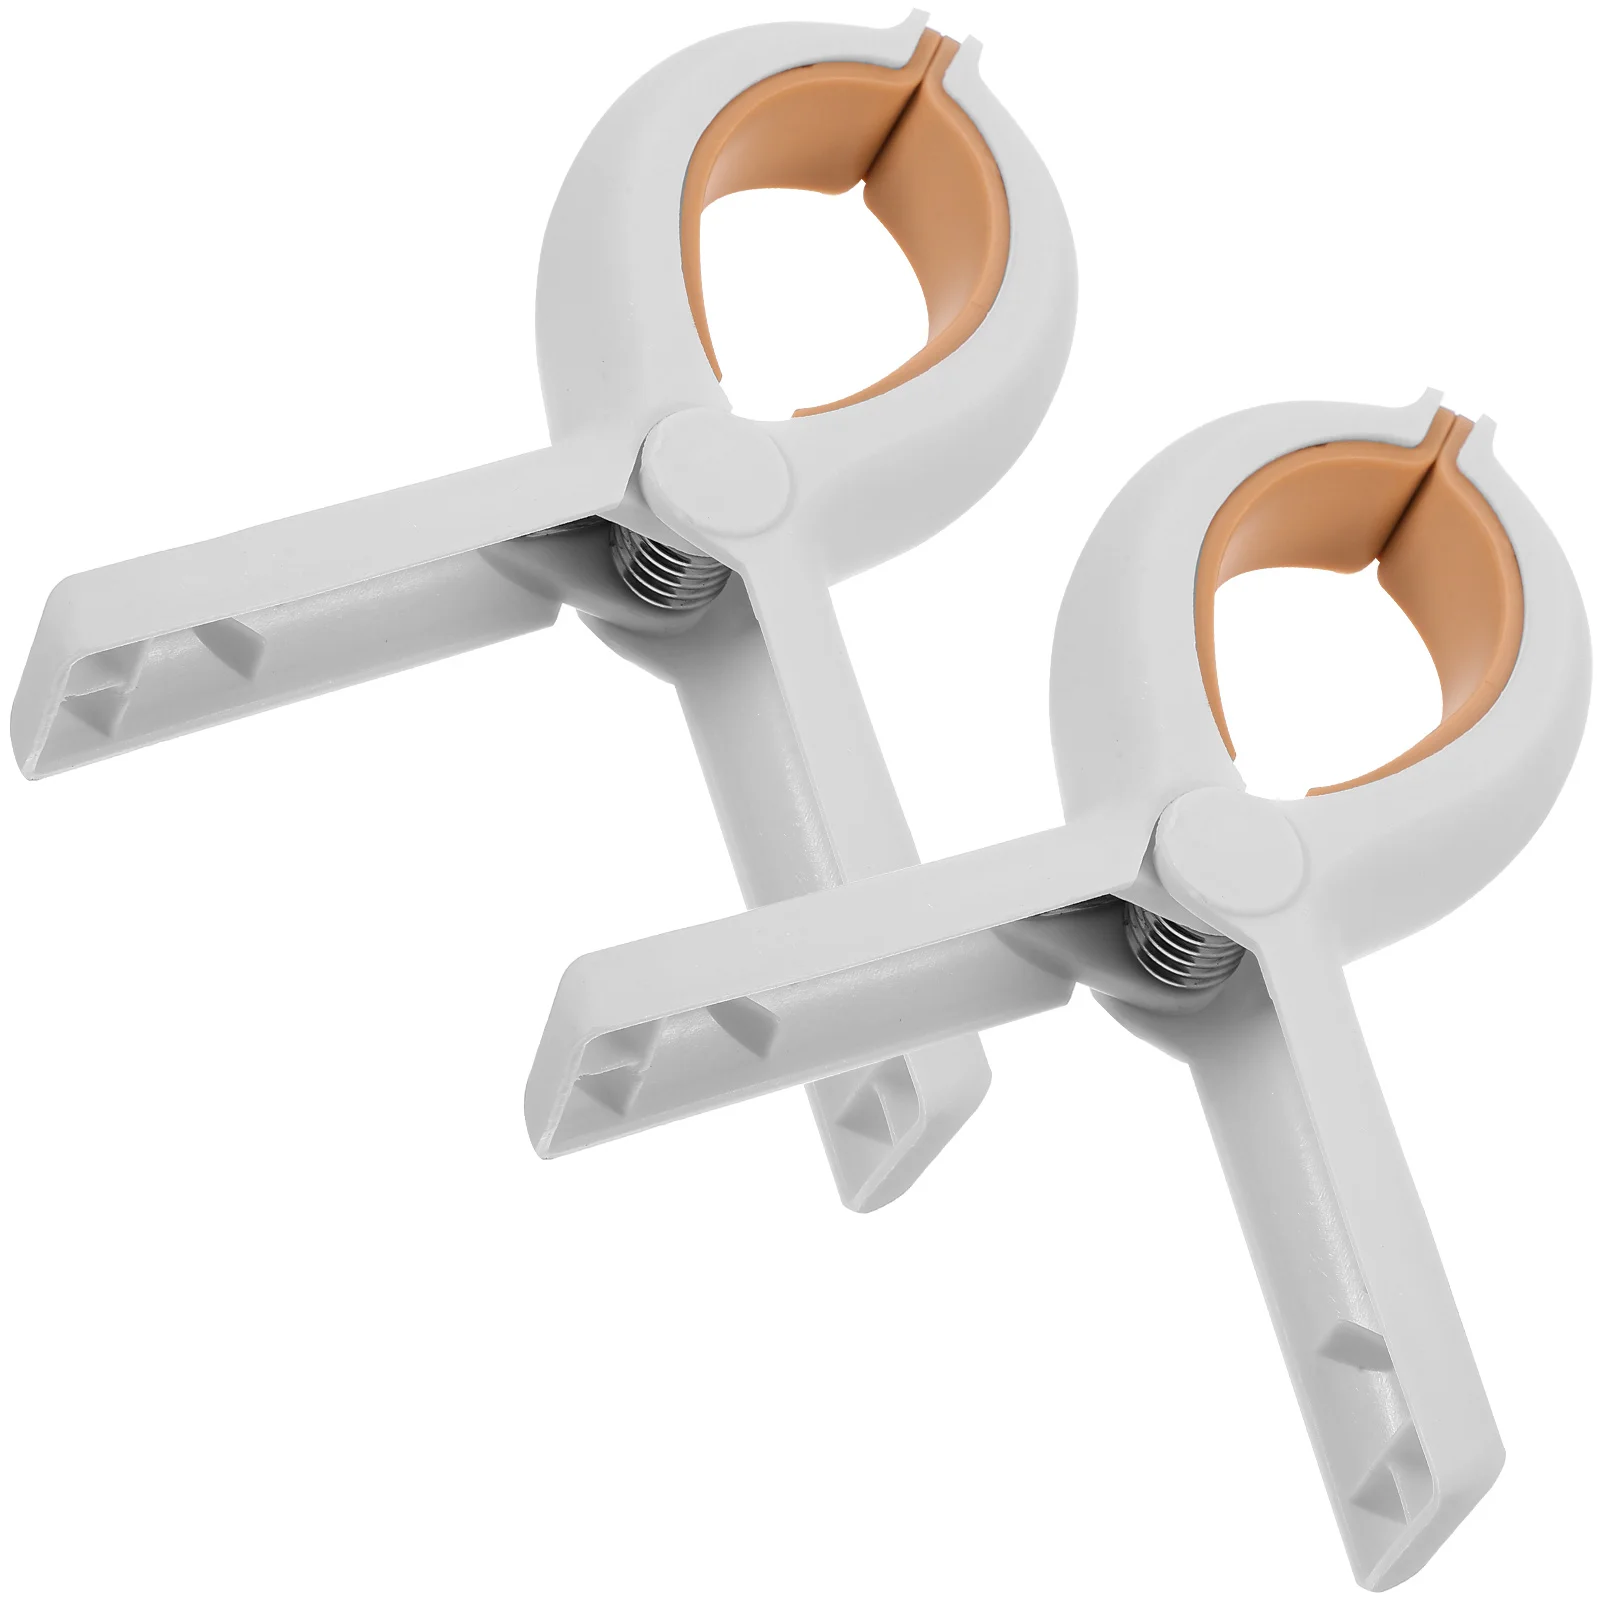 

2 Pcs Non-slip Clothespin Towel Clips Multifunctional Clothespins Windproof Quilt Clamps Beach Pp Pool Chair Plastic